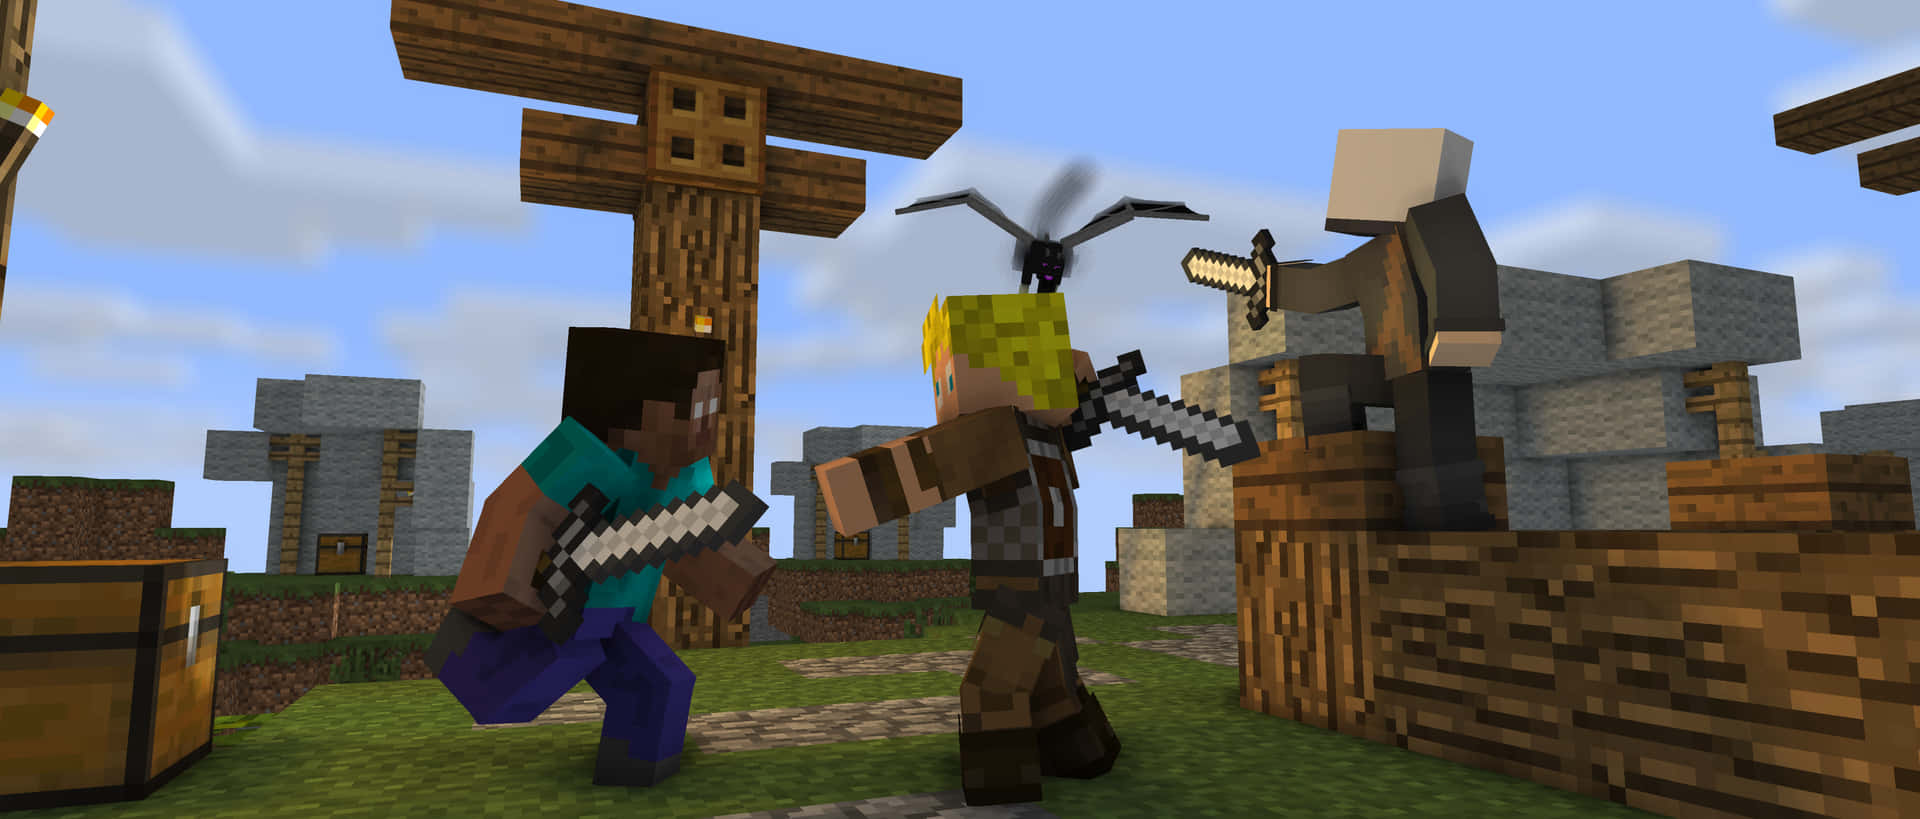 Equip yourself for victory with these powerful Minecraft Weapons in High-Resolution! Wallpaper